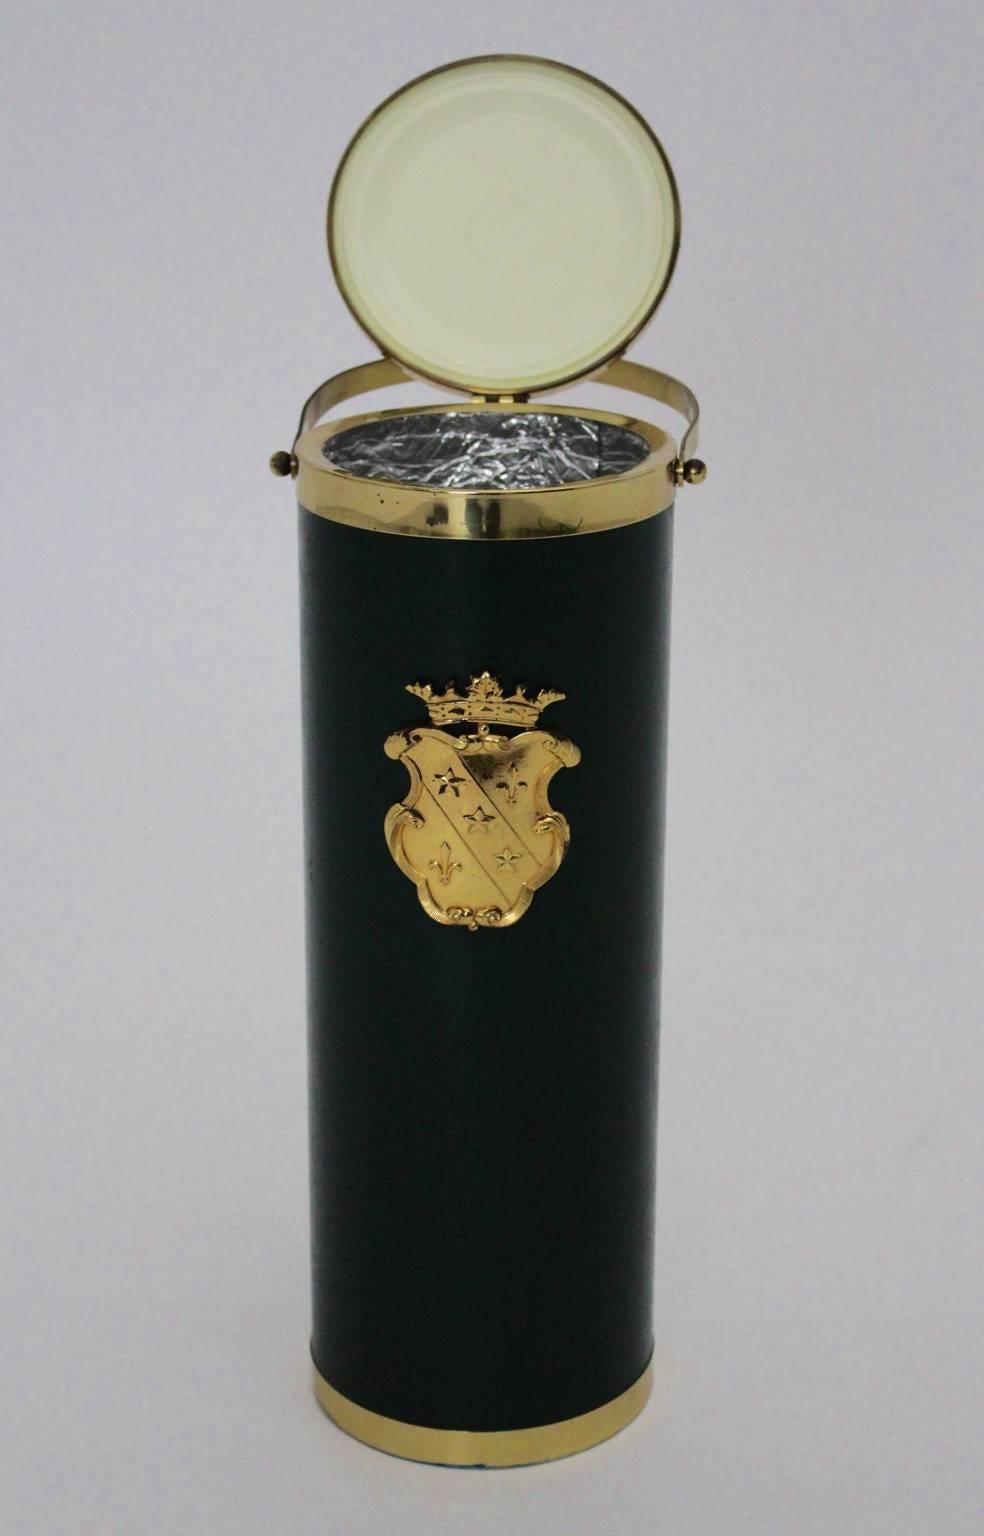 The wine cooler was made of a brass plated metal base and also made of waxed green faux leather.
The front side is decorated with a golden crown.
The wine cooler was fitted with a silver foil covering.
The vintage condition is very good .
All